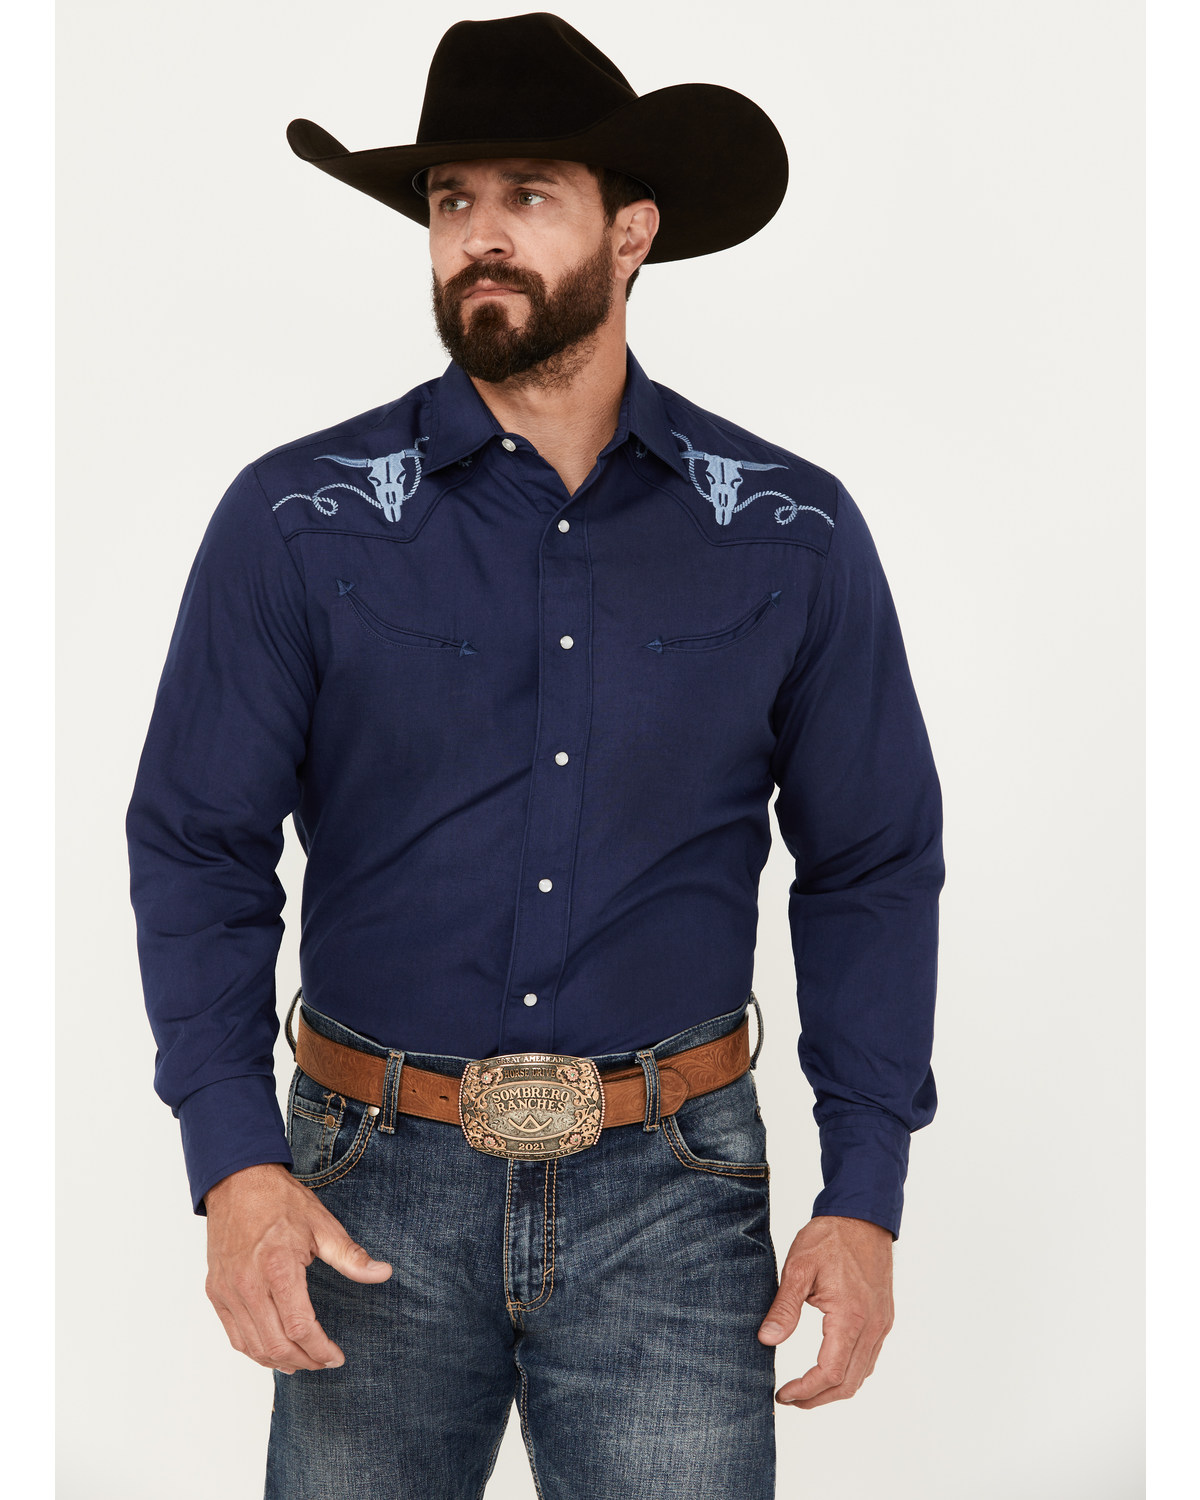 Roper Men's Embroidered Long Sleeve Pearl Snap Western Shirt